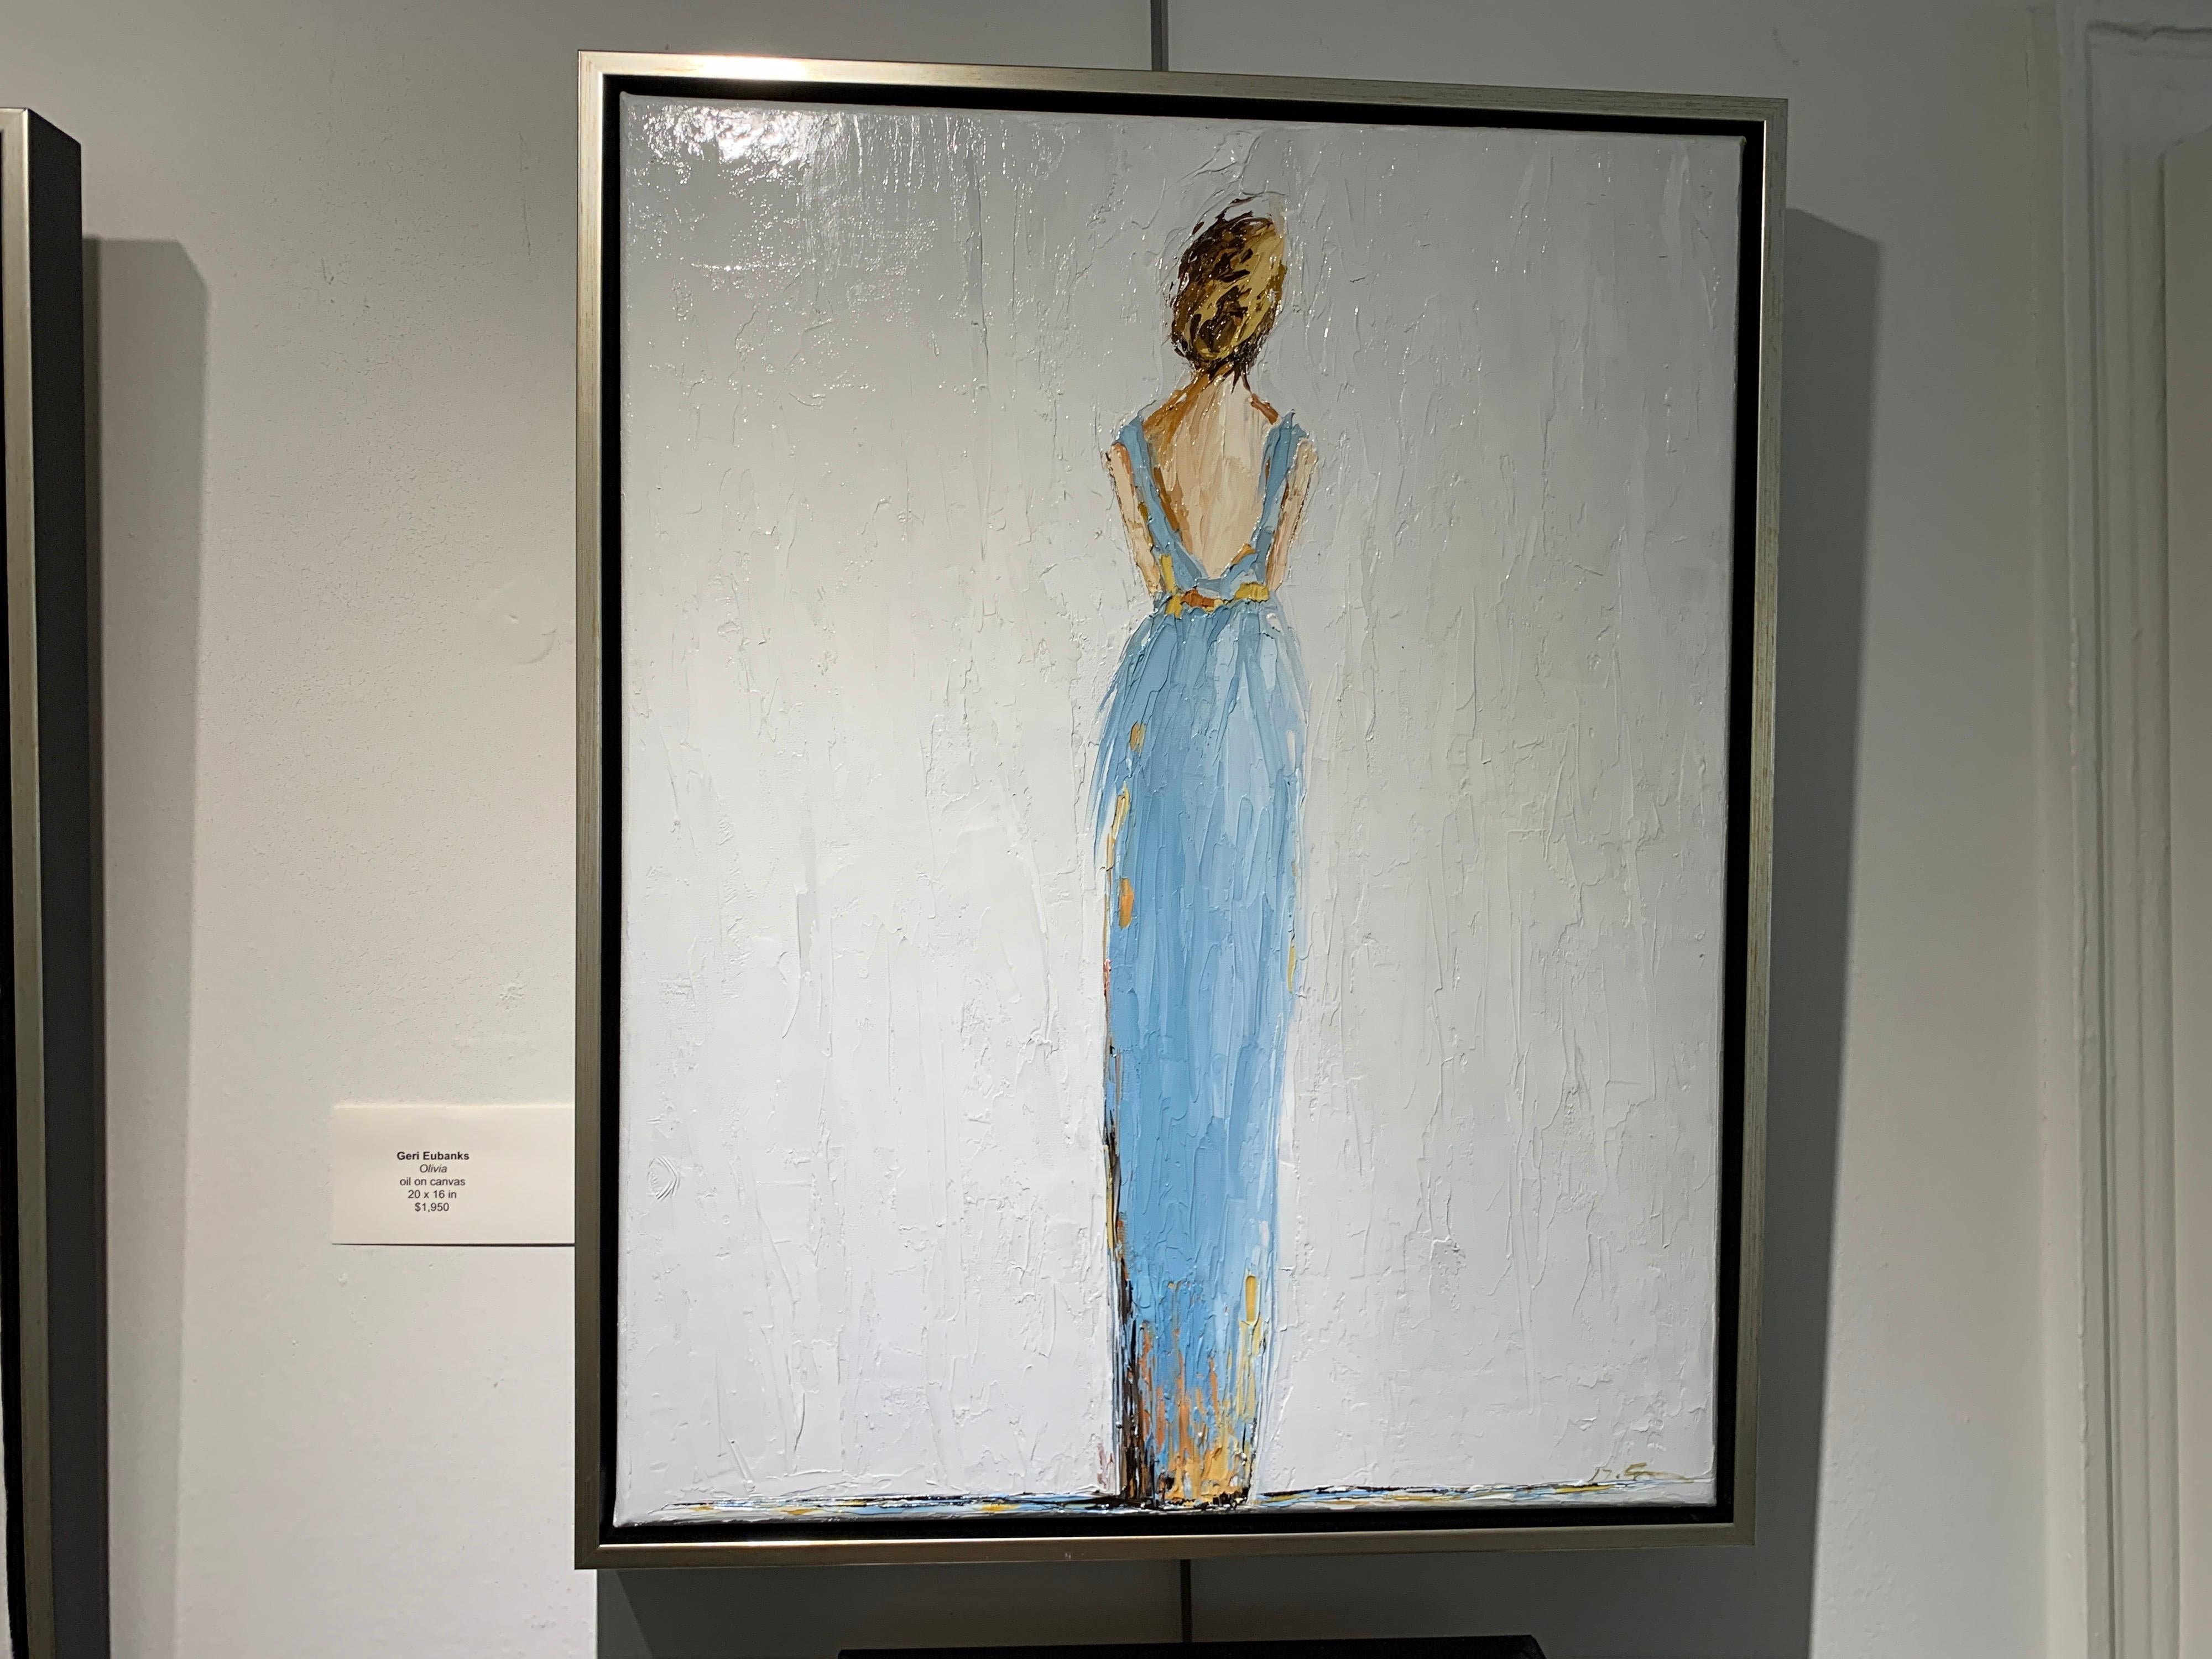 'Olivia', is a vertical framed Impressionist figurative oil on canvas painting created by American artist Geri Eubanks in 2020. Featuring a palette made of sky blue, grey and golden tonalities, the painting depicts a blond-haired woman represented